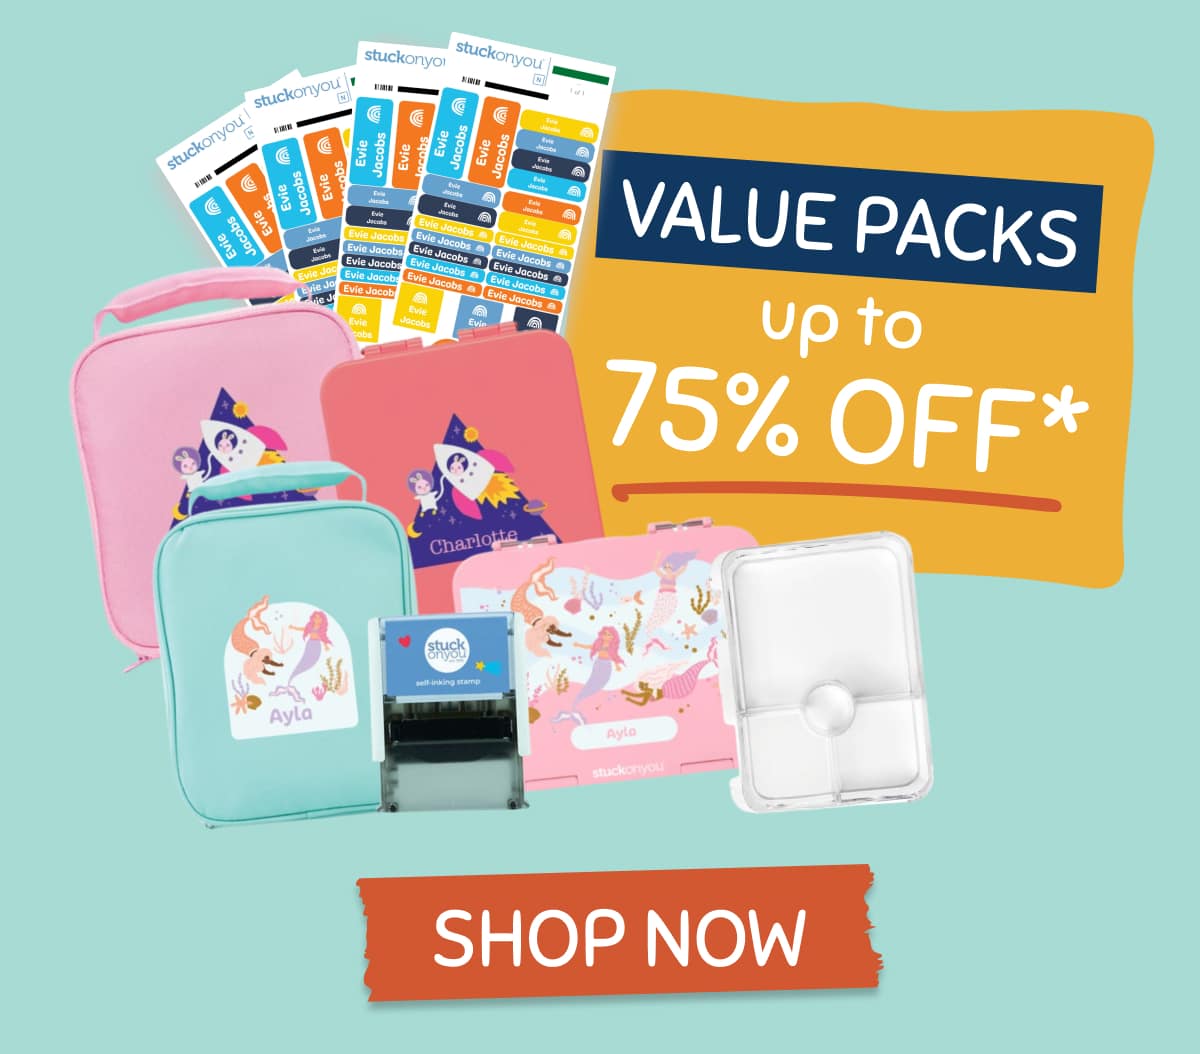 Up to 75% OFF on value packs